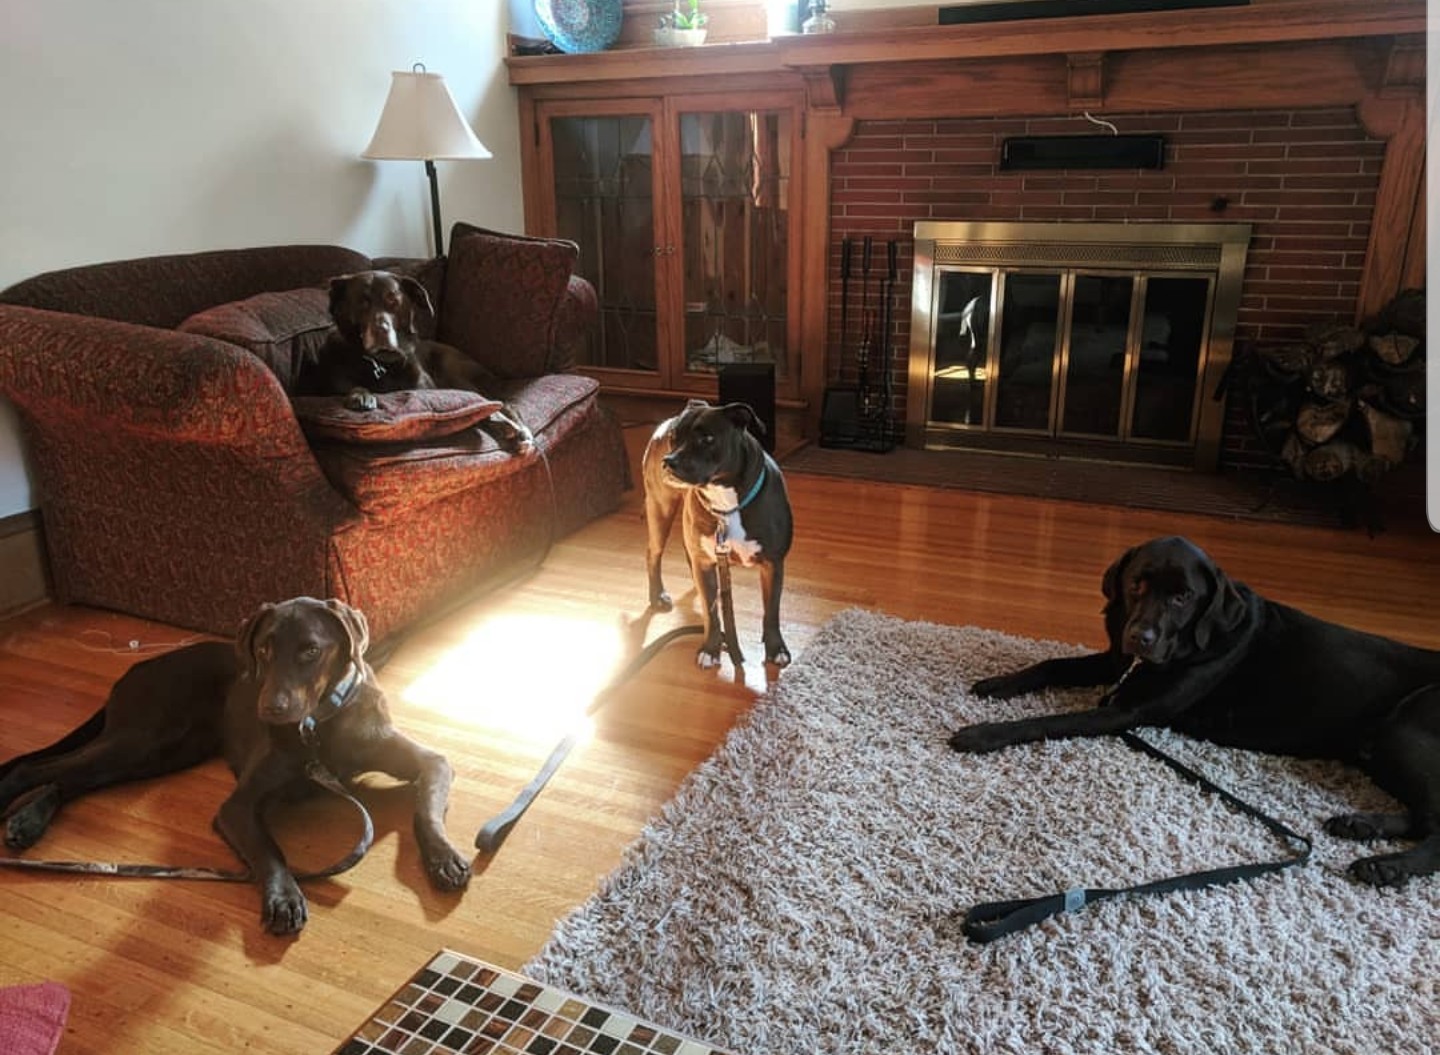 Pet sitting a pitbull and 3 chocolate labs